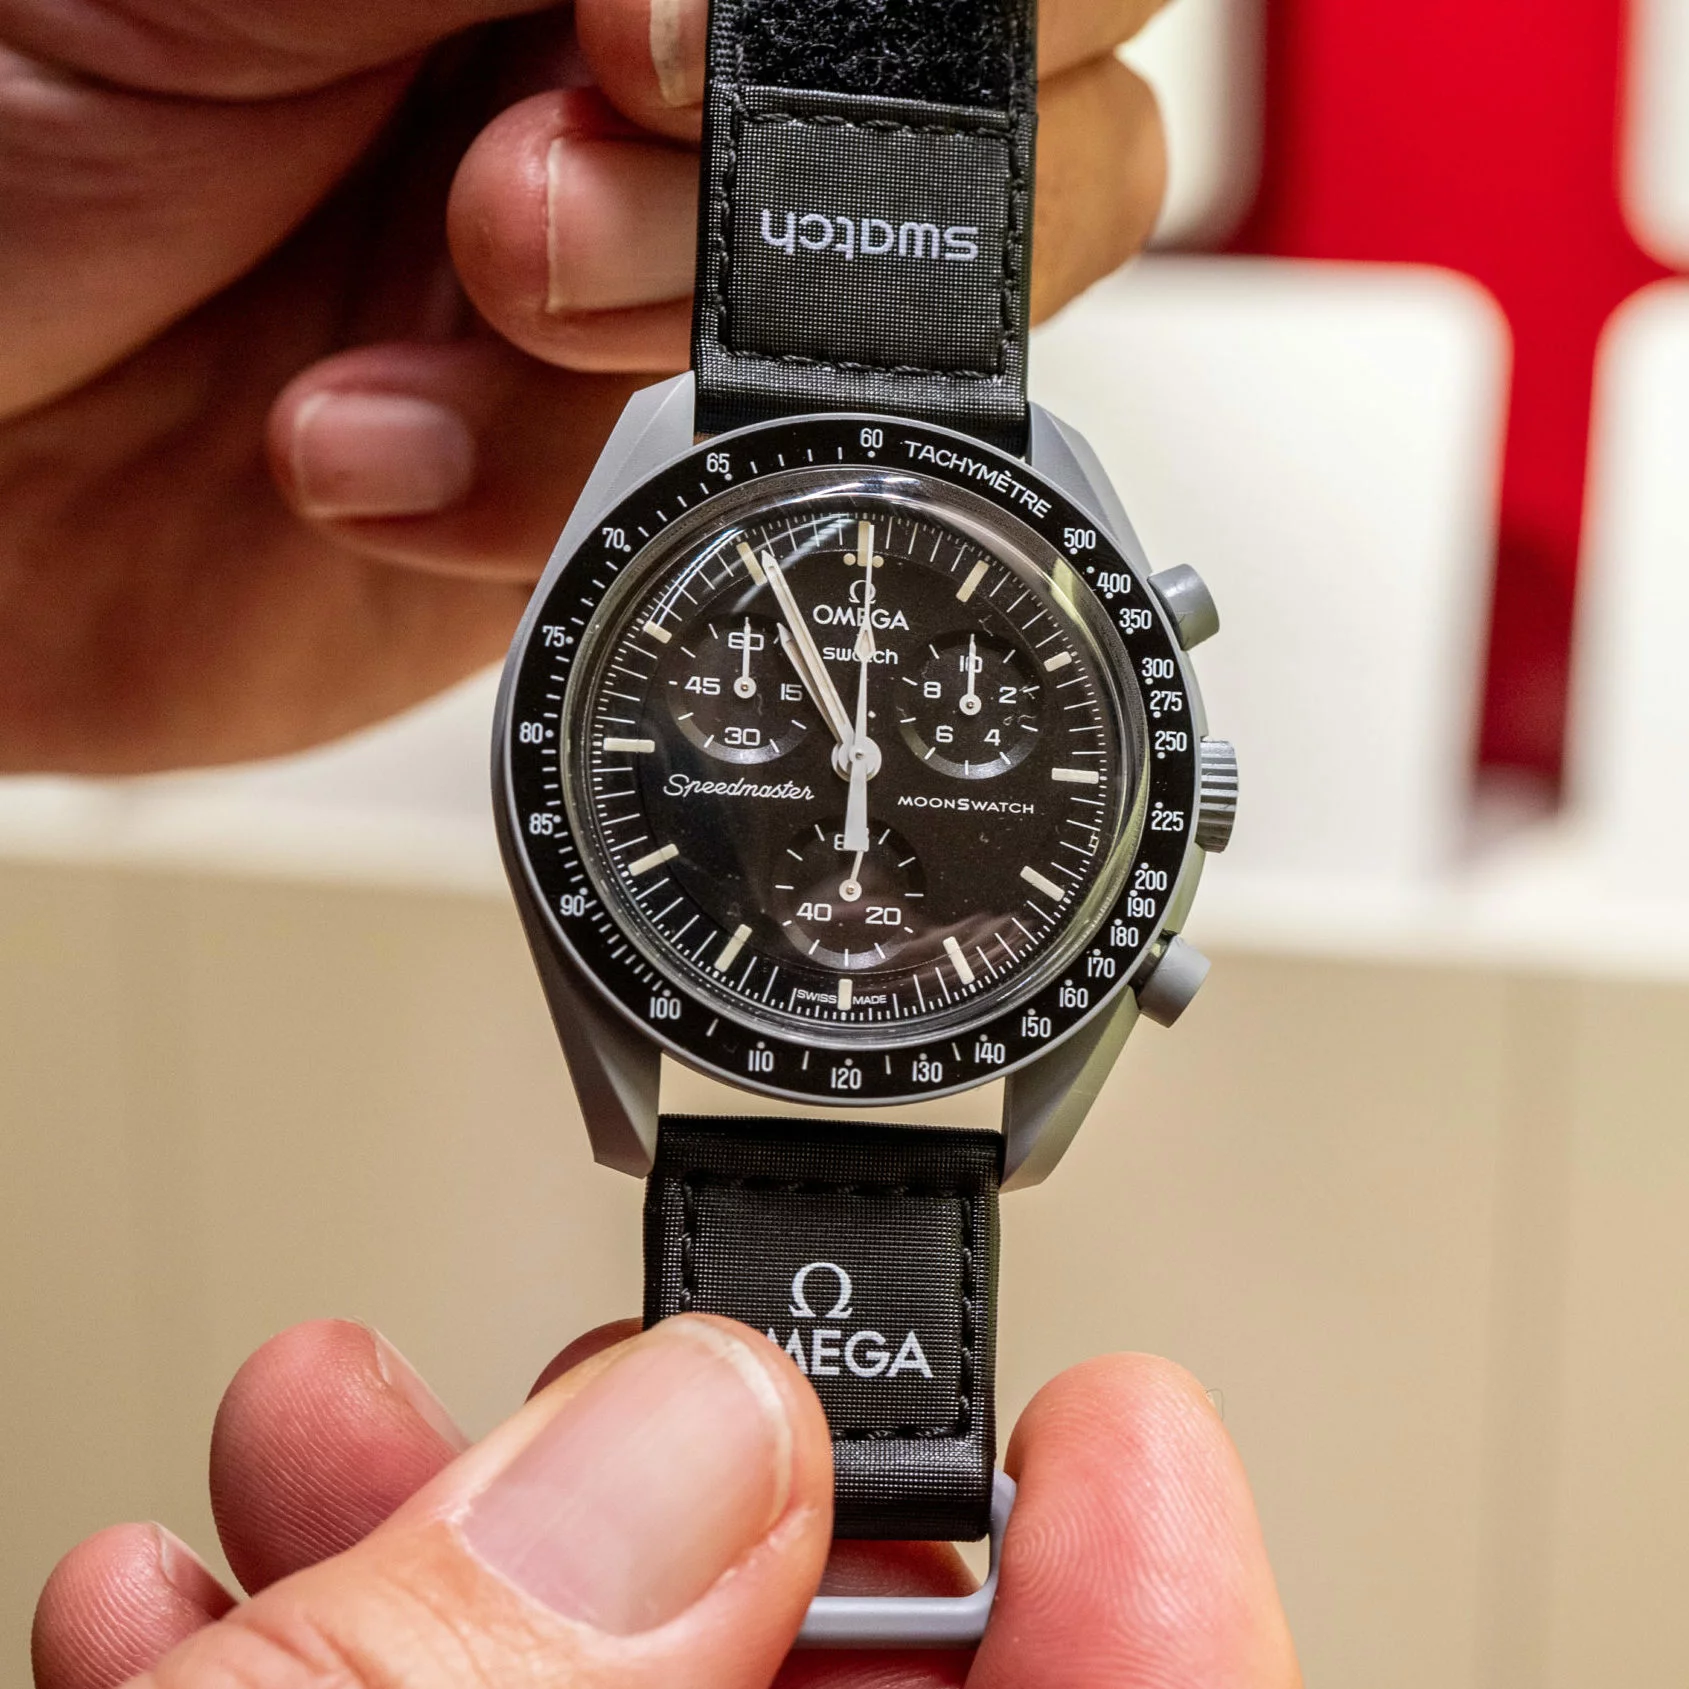 Video: Hands-on with all 11 missions of the Swatch x Omega MoonSwatch